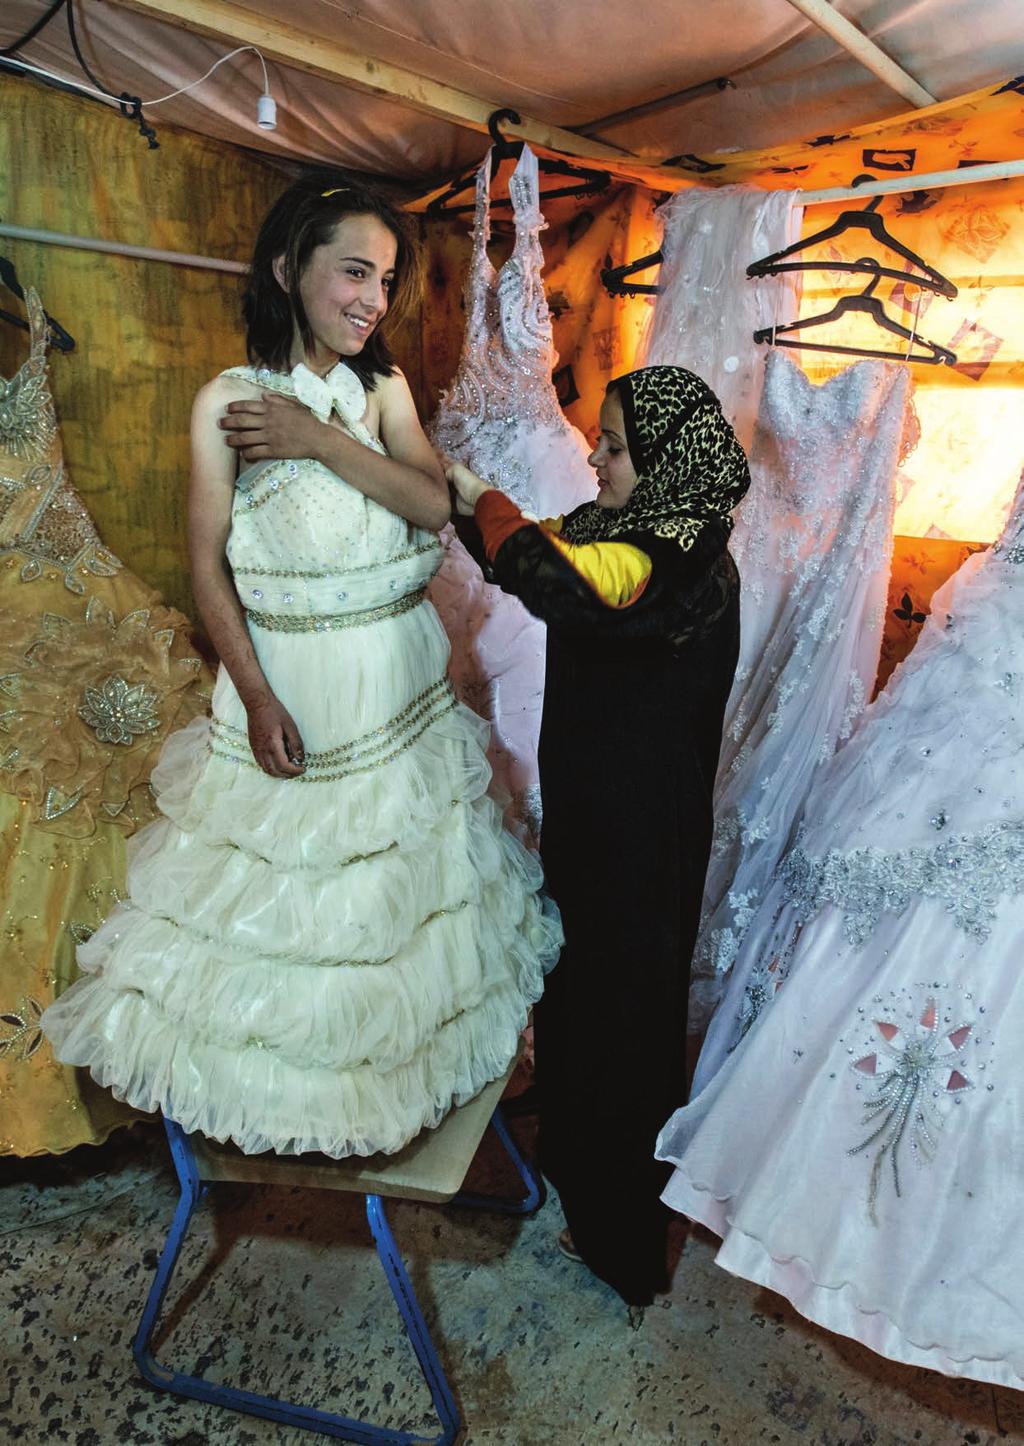 The Wedding and Beauty parlour in Za atri camp, Jordan, is a welcome